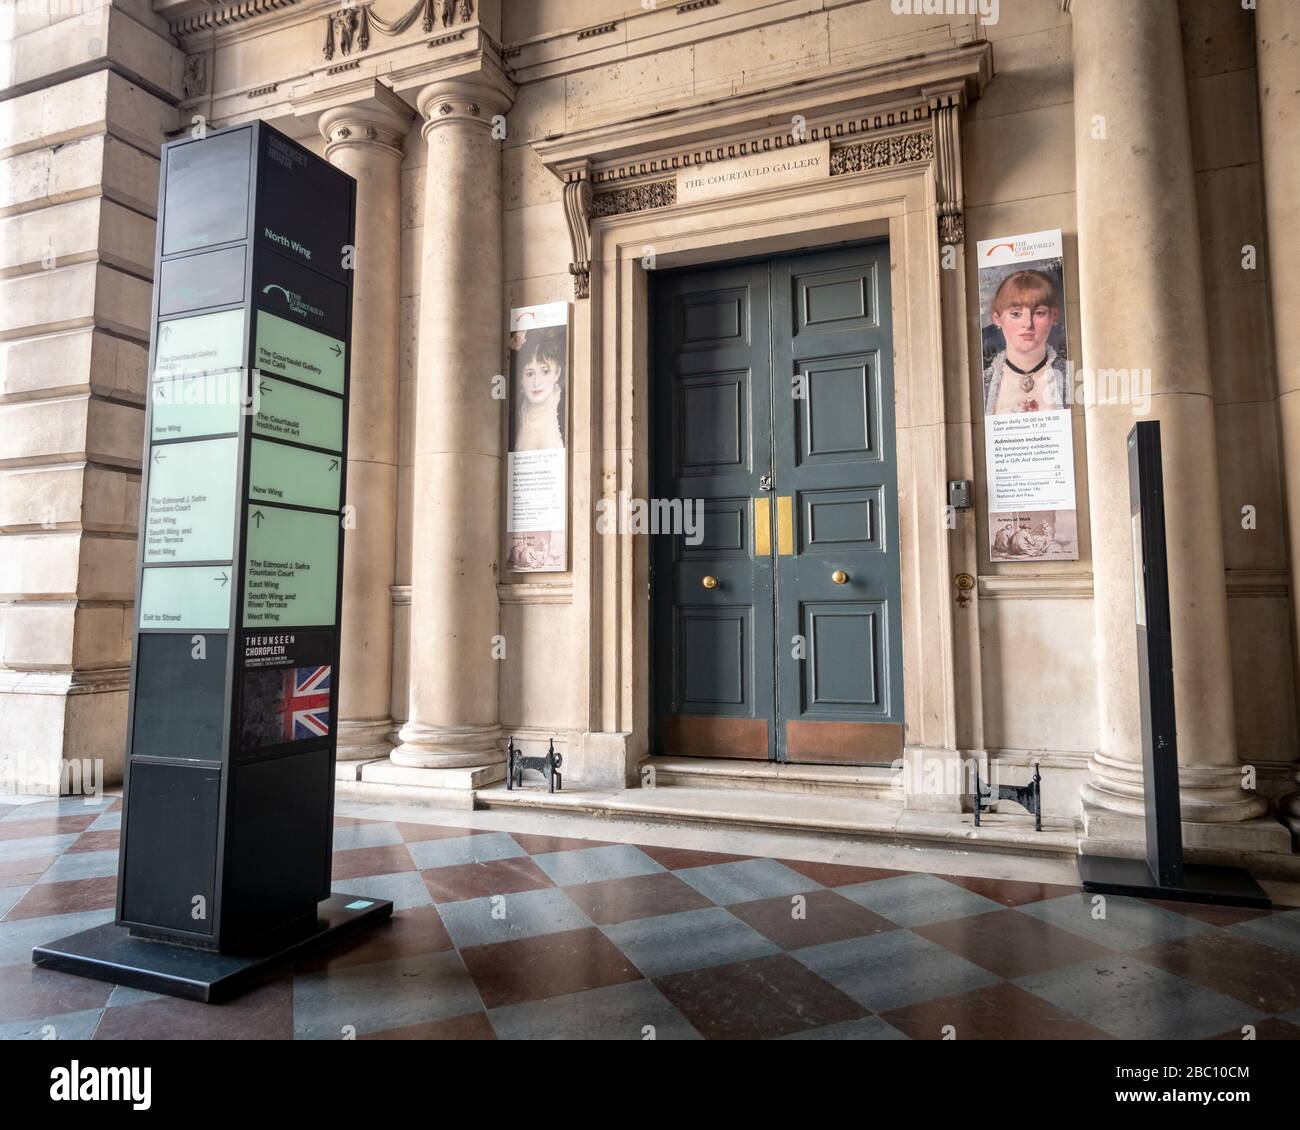 The Courtauld Gallery entrance. A public gallery associated to the Institute of Art in Somerset House, London. Stock Photo